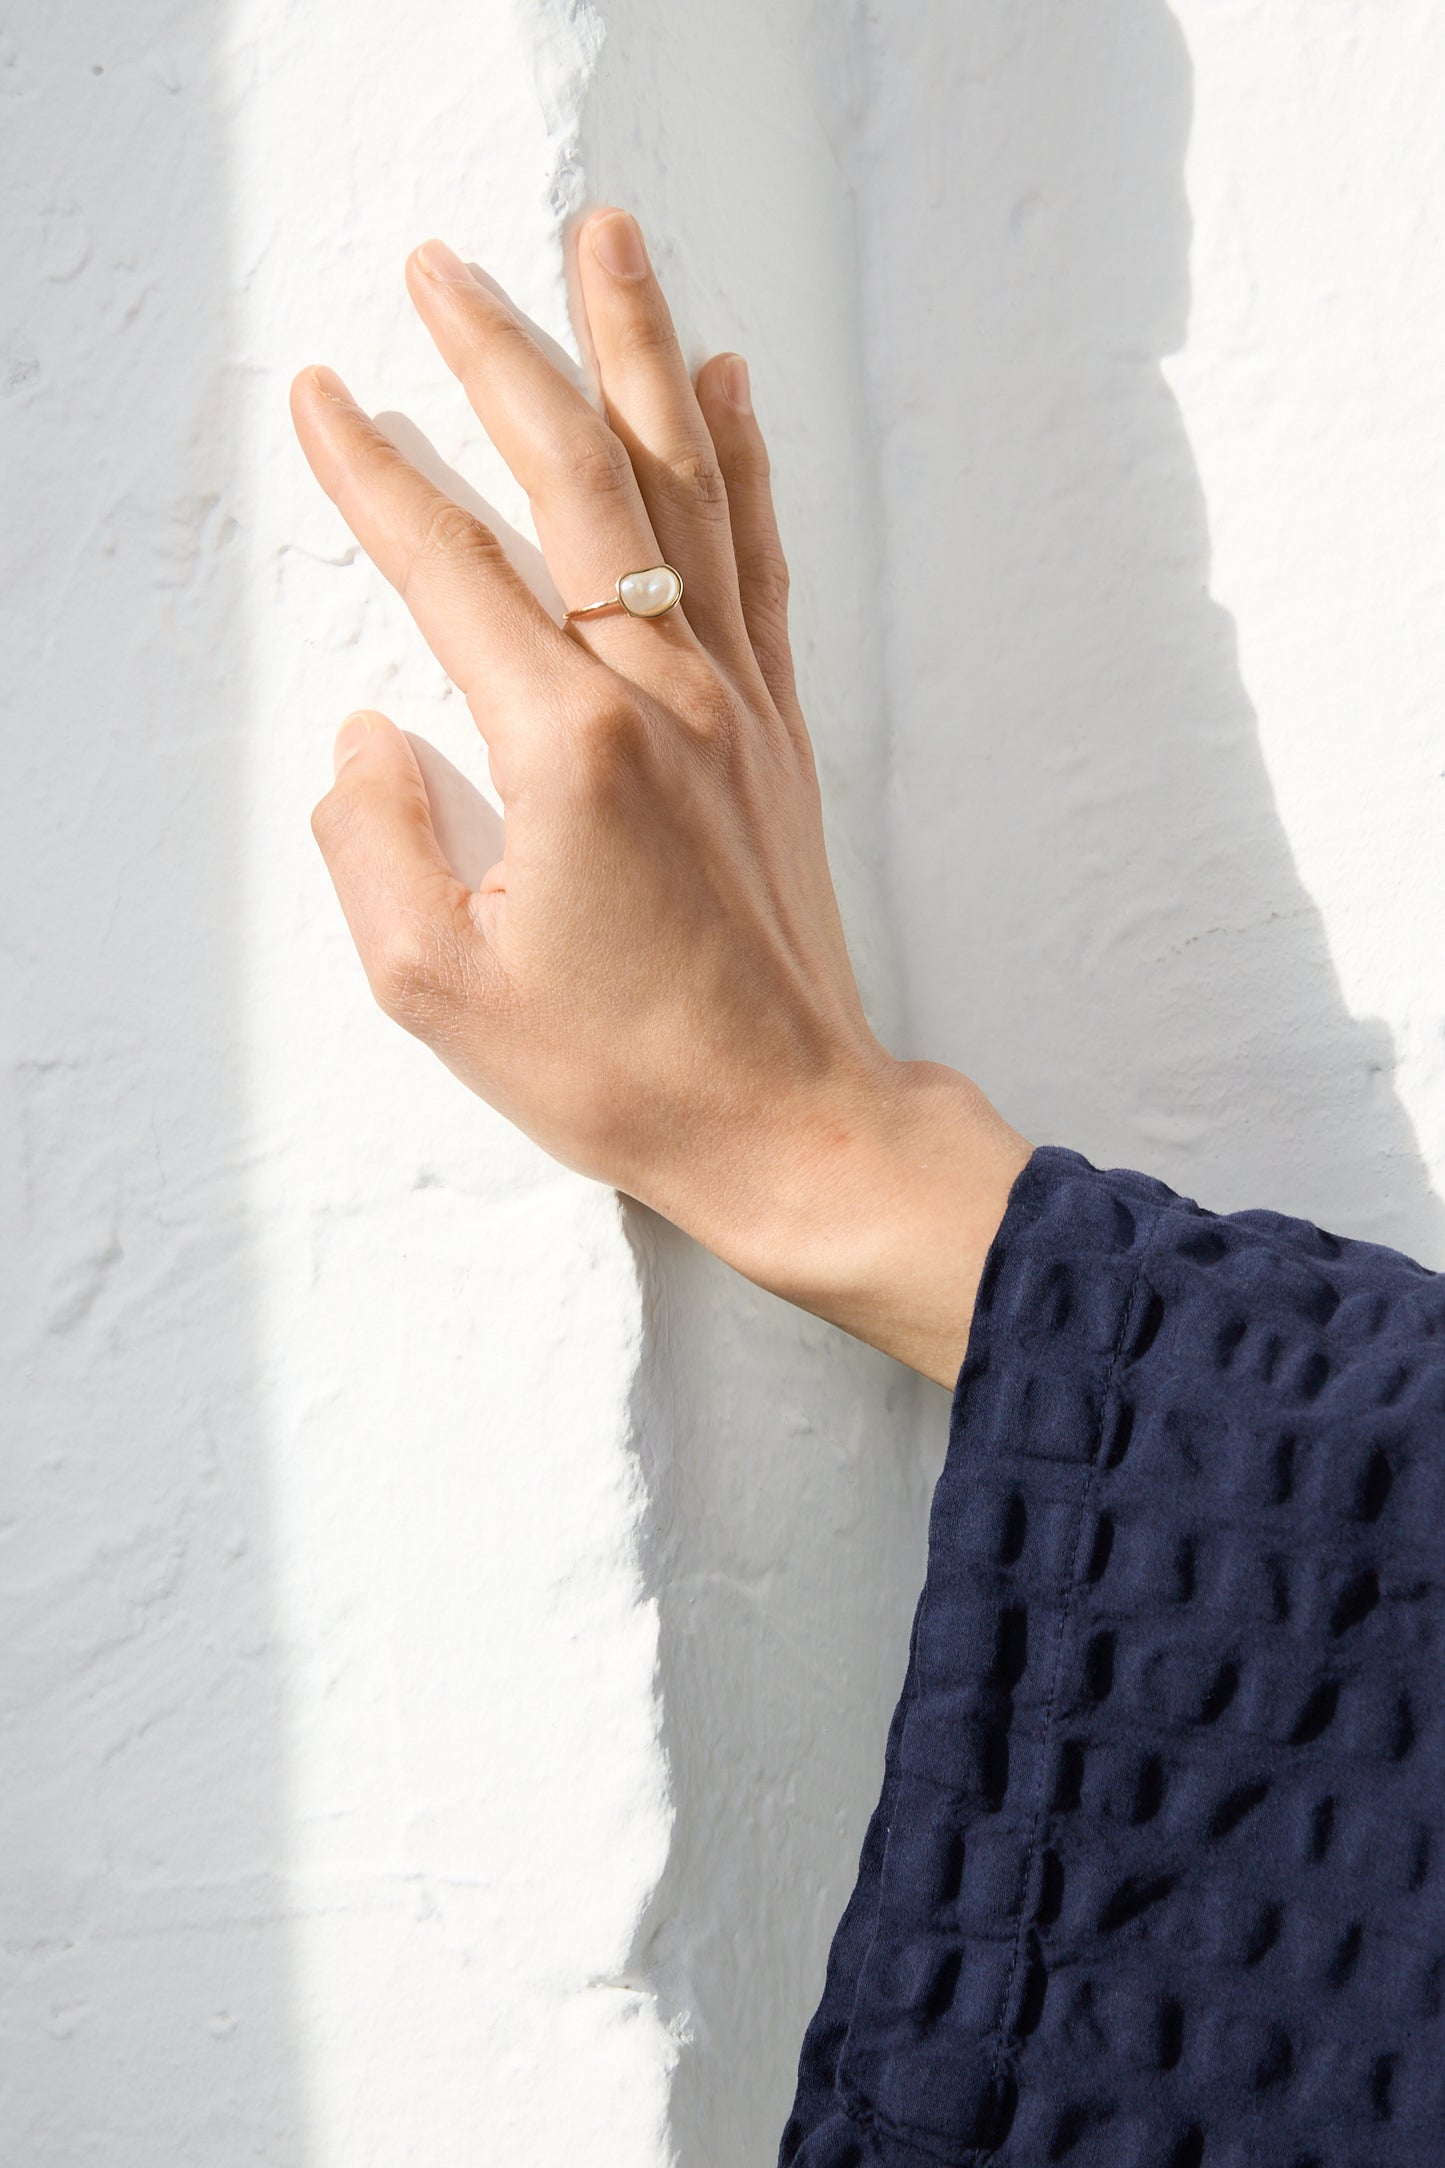 A Mary MacGill 14K Floating Ring in Pearl adorns the hand, beautifully showcasing a handmade pearl accessory.